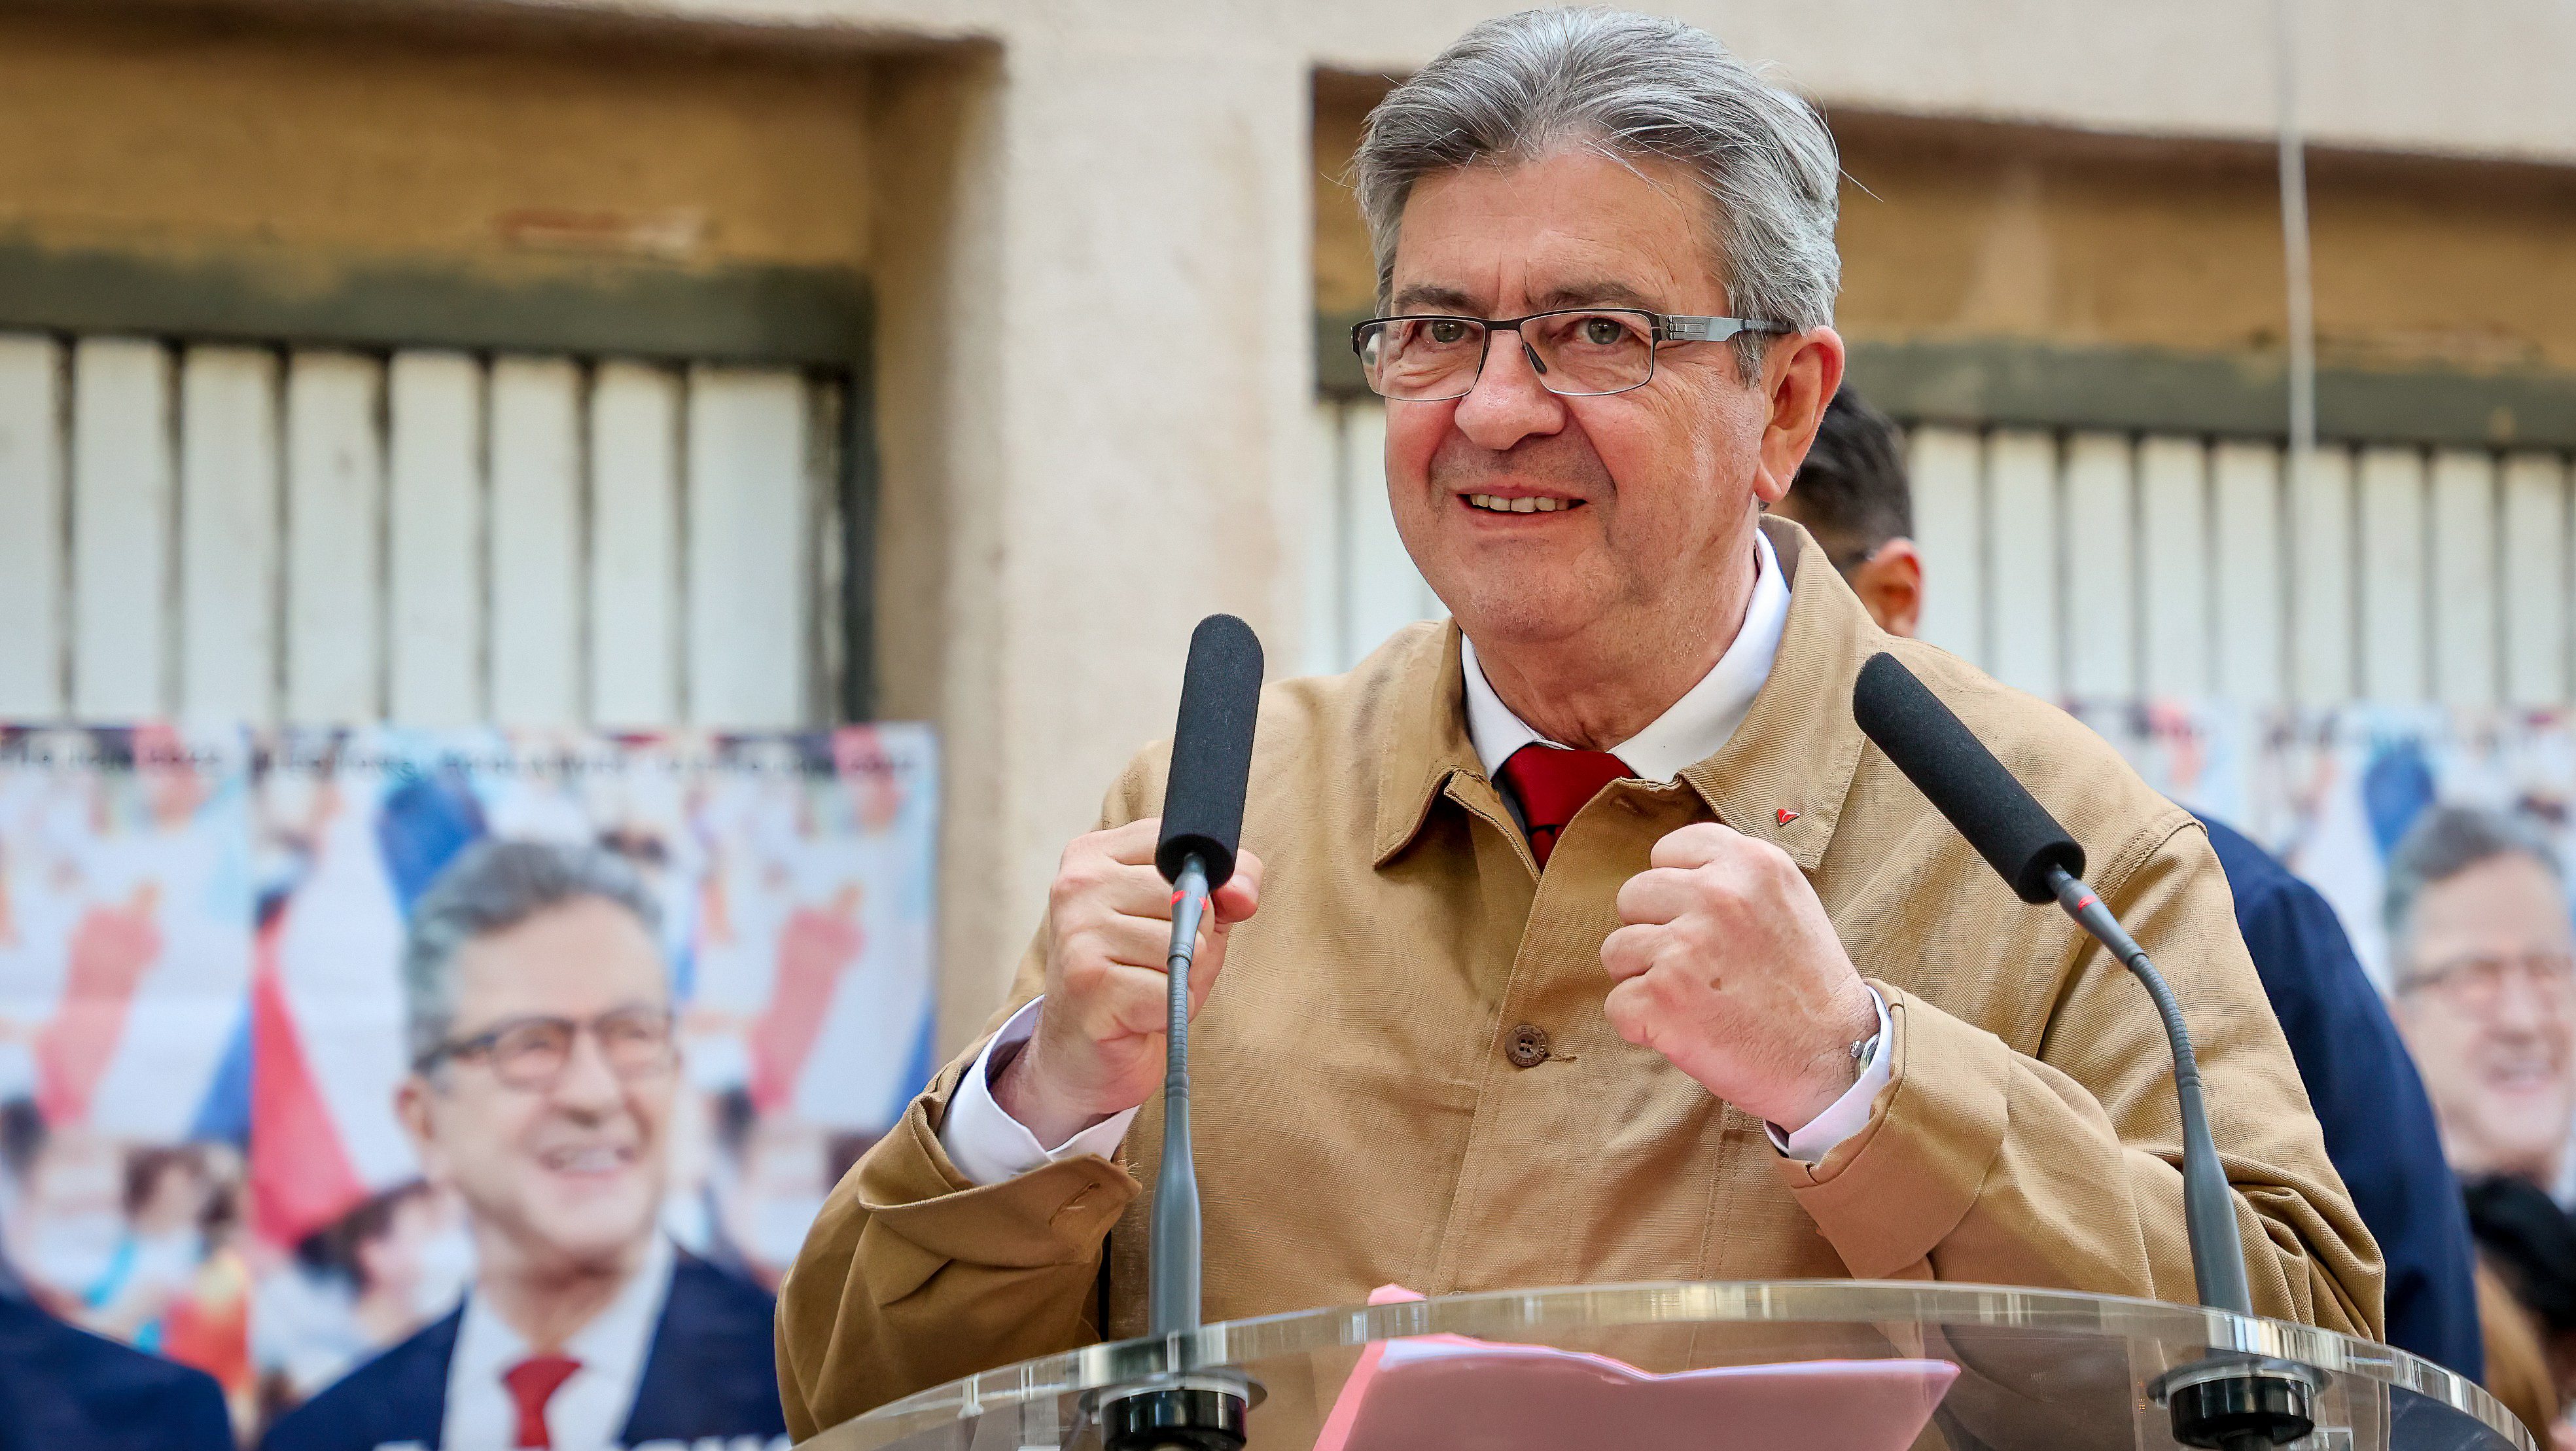 Jean-Luc Mélenchon speaks on stage during his political